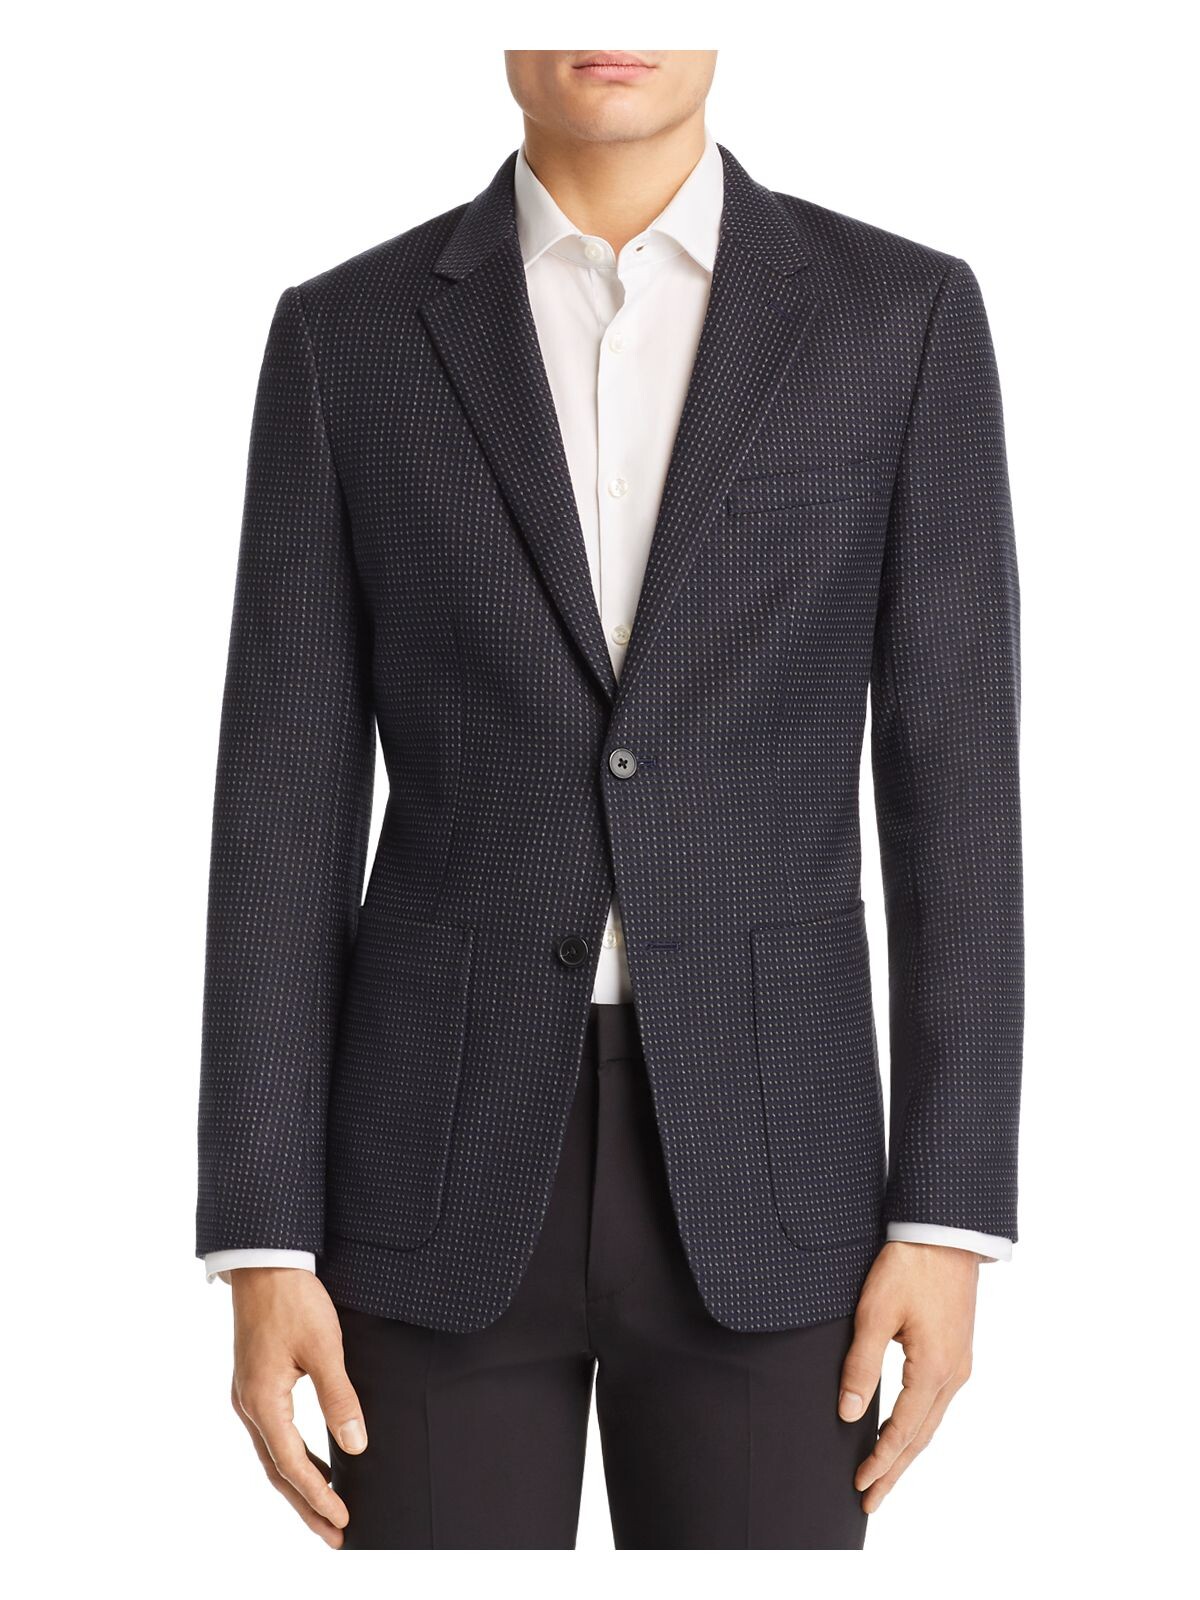 THEORY Mens Gray Single Breasted, Slim Fit Sport Coat 36R